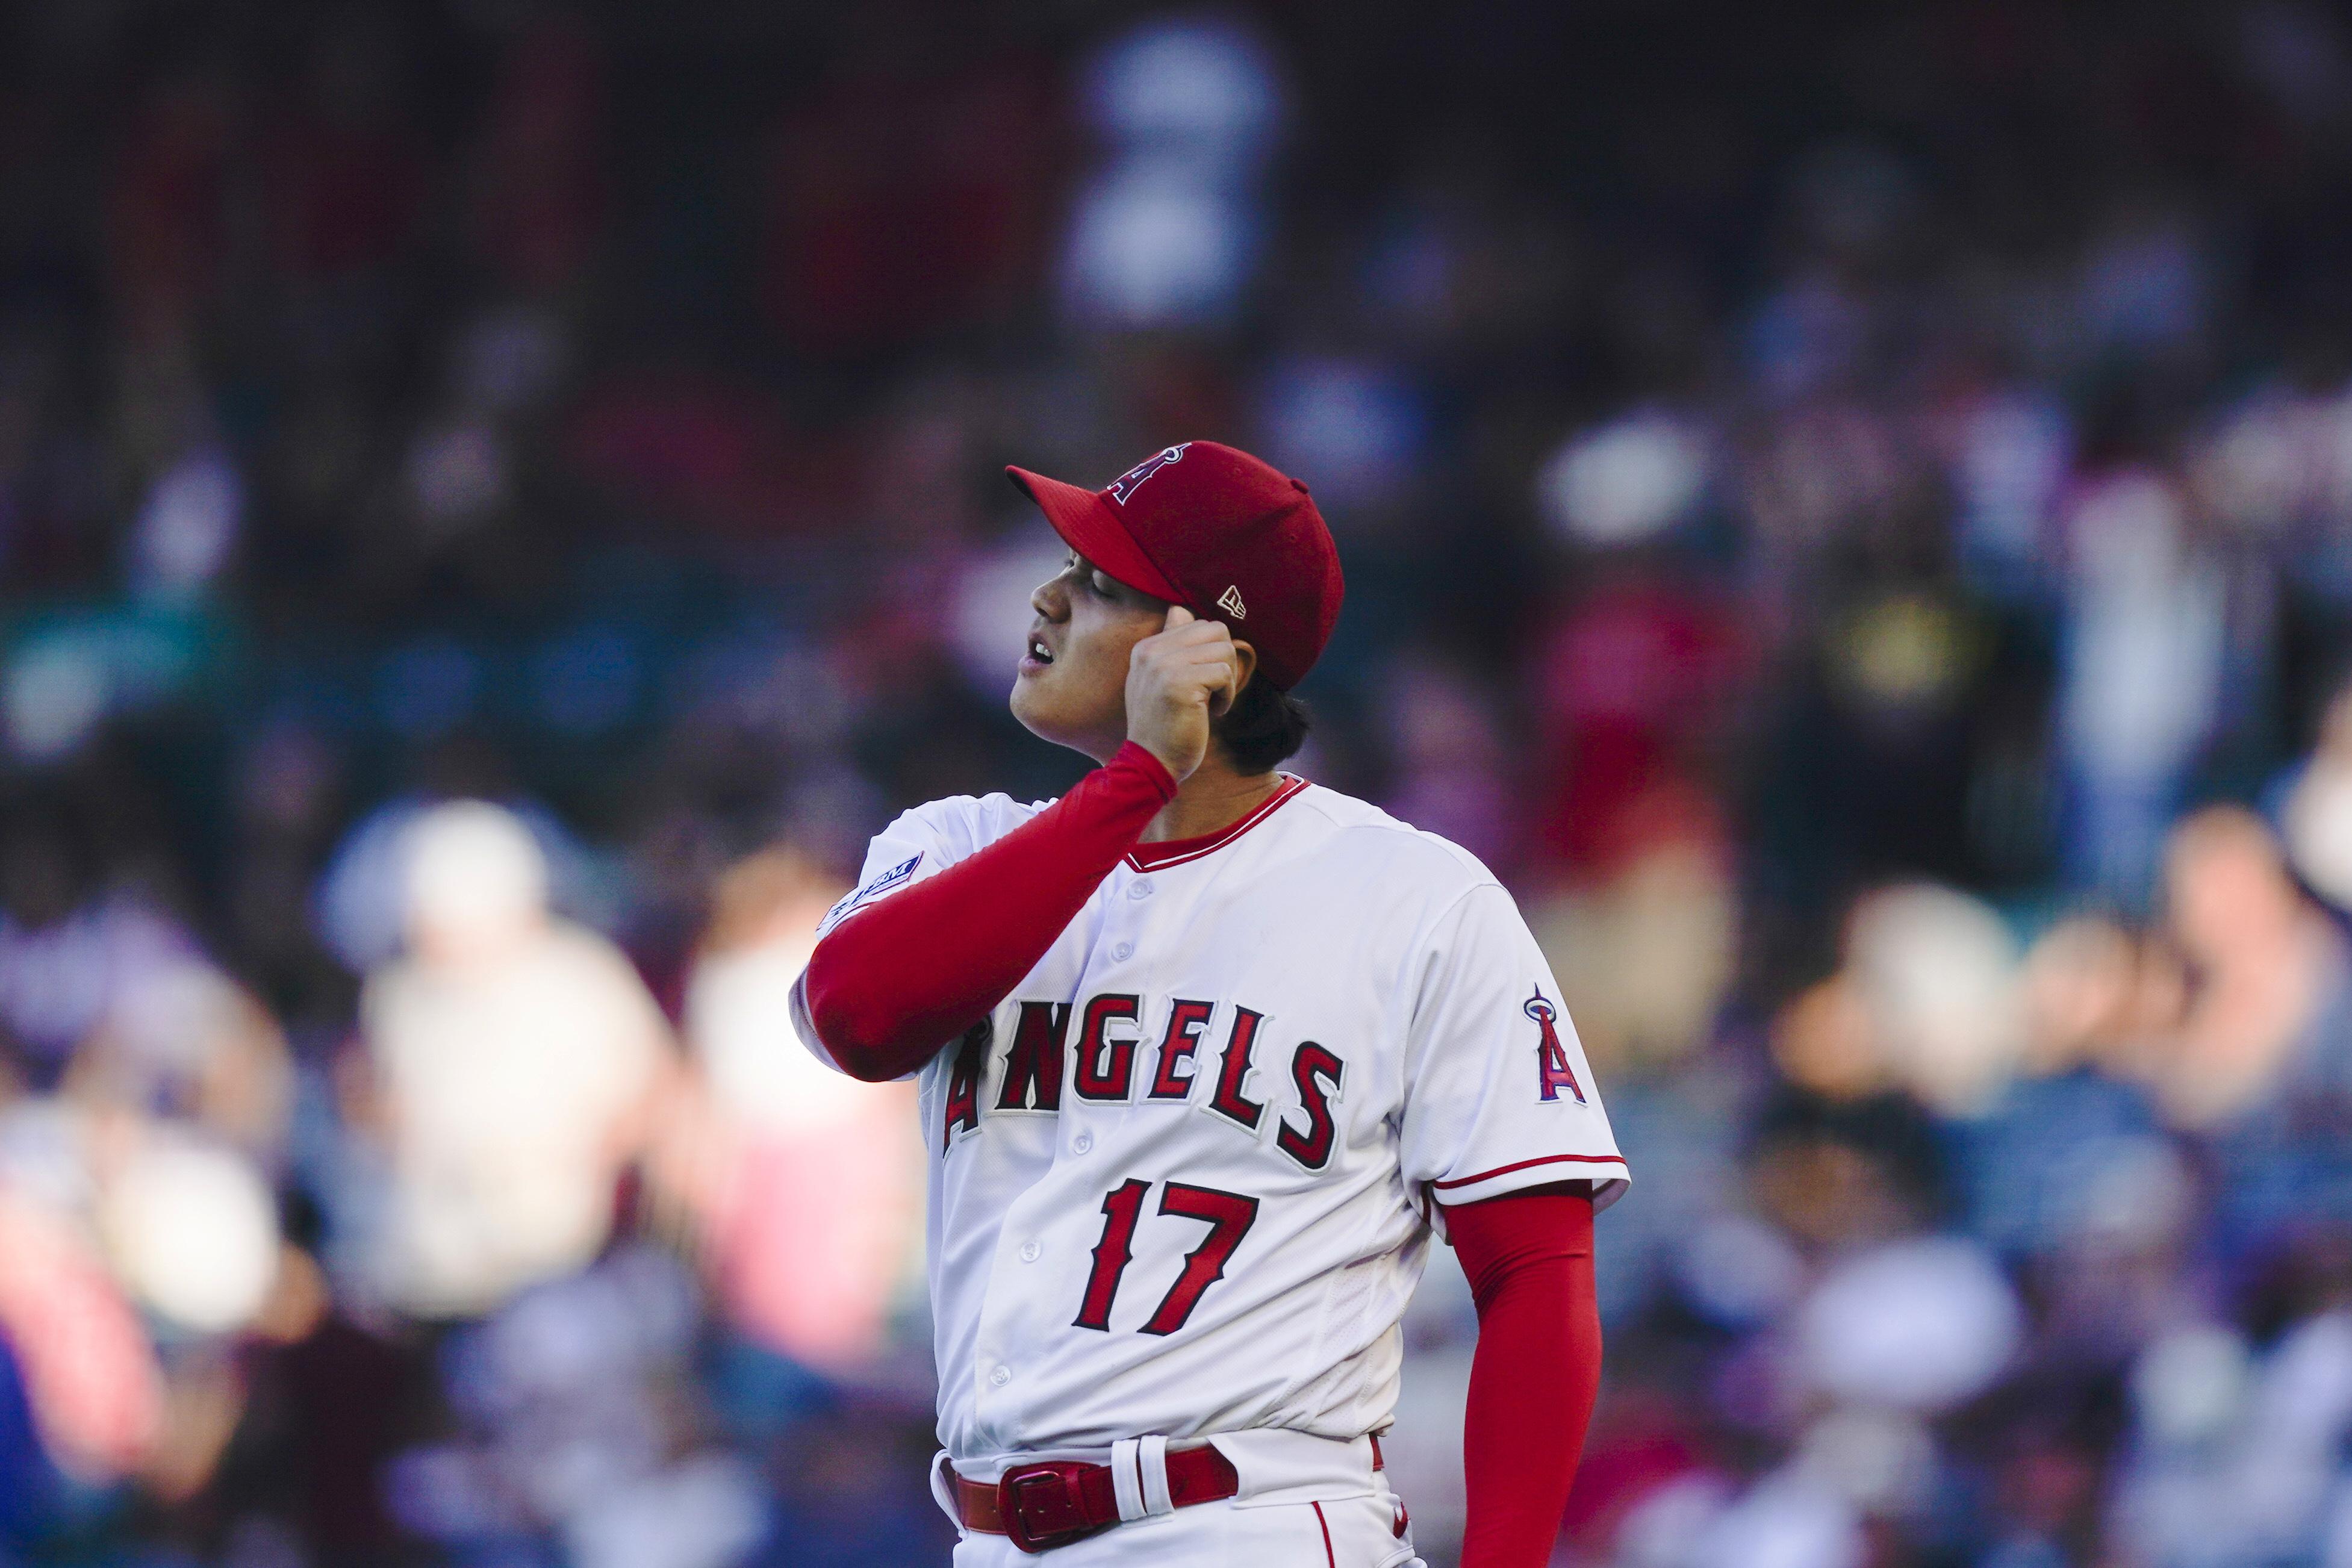 Enjoy Shohei Ohtani's historic MLB season with the Angels with new sketch